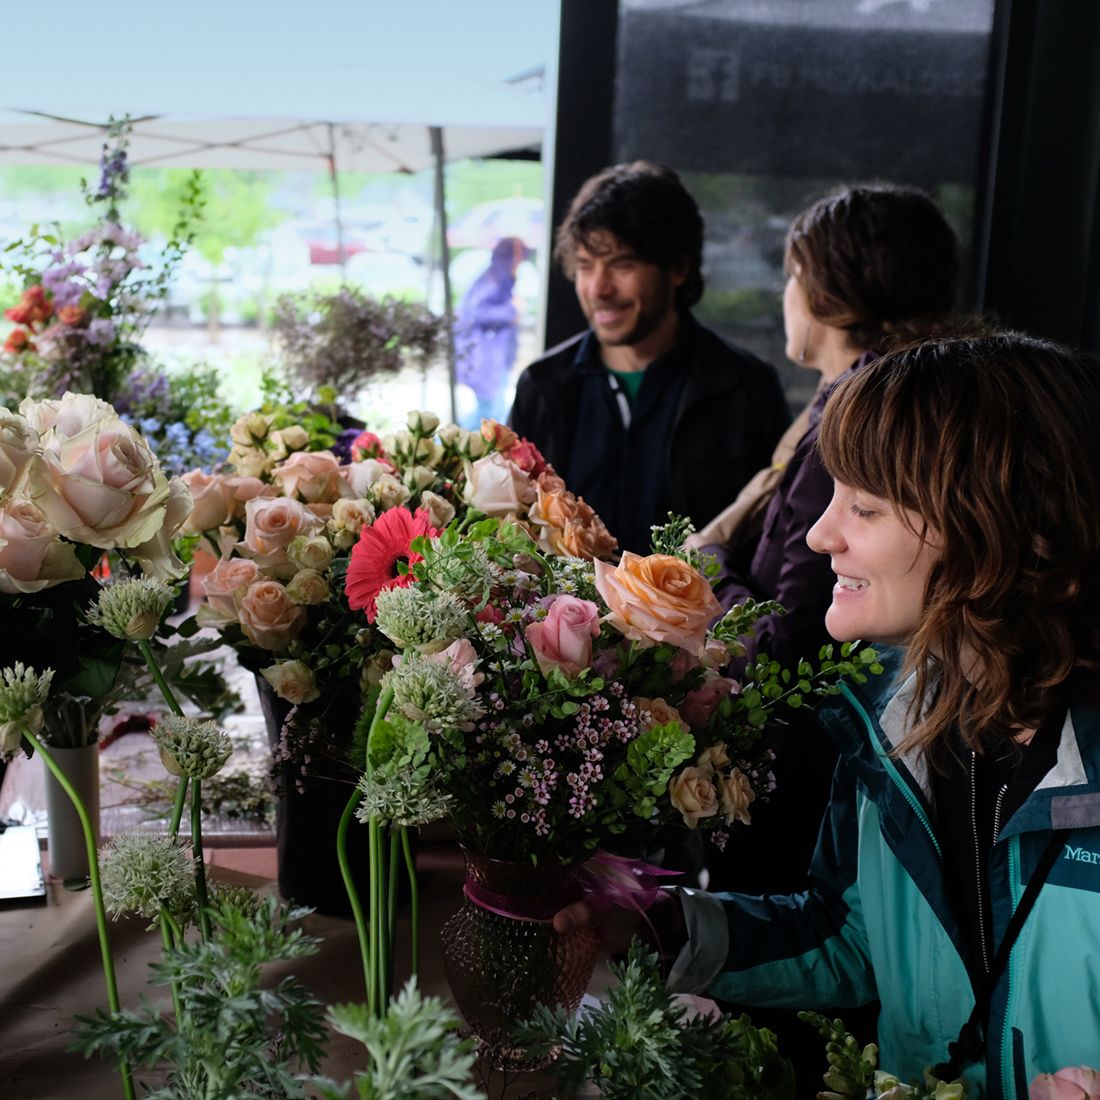 shoppers looking at flowers at pop-up market